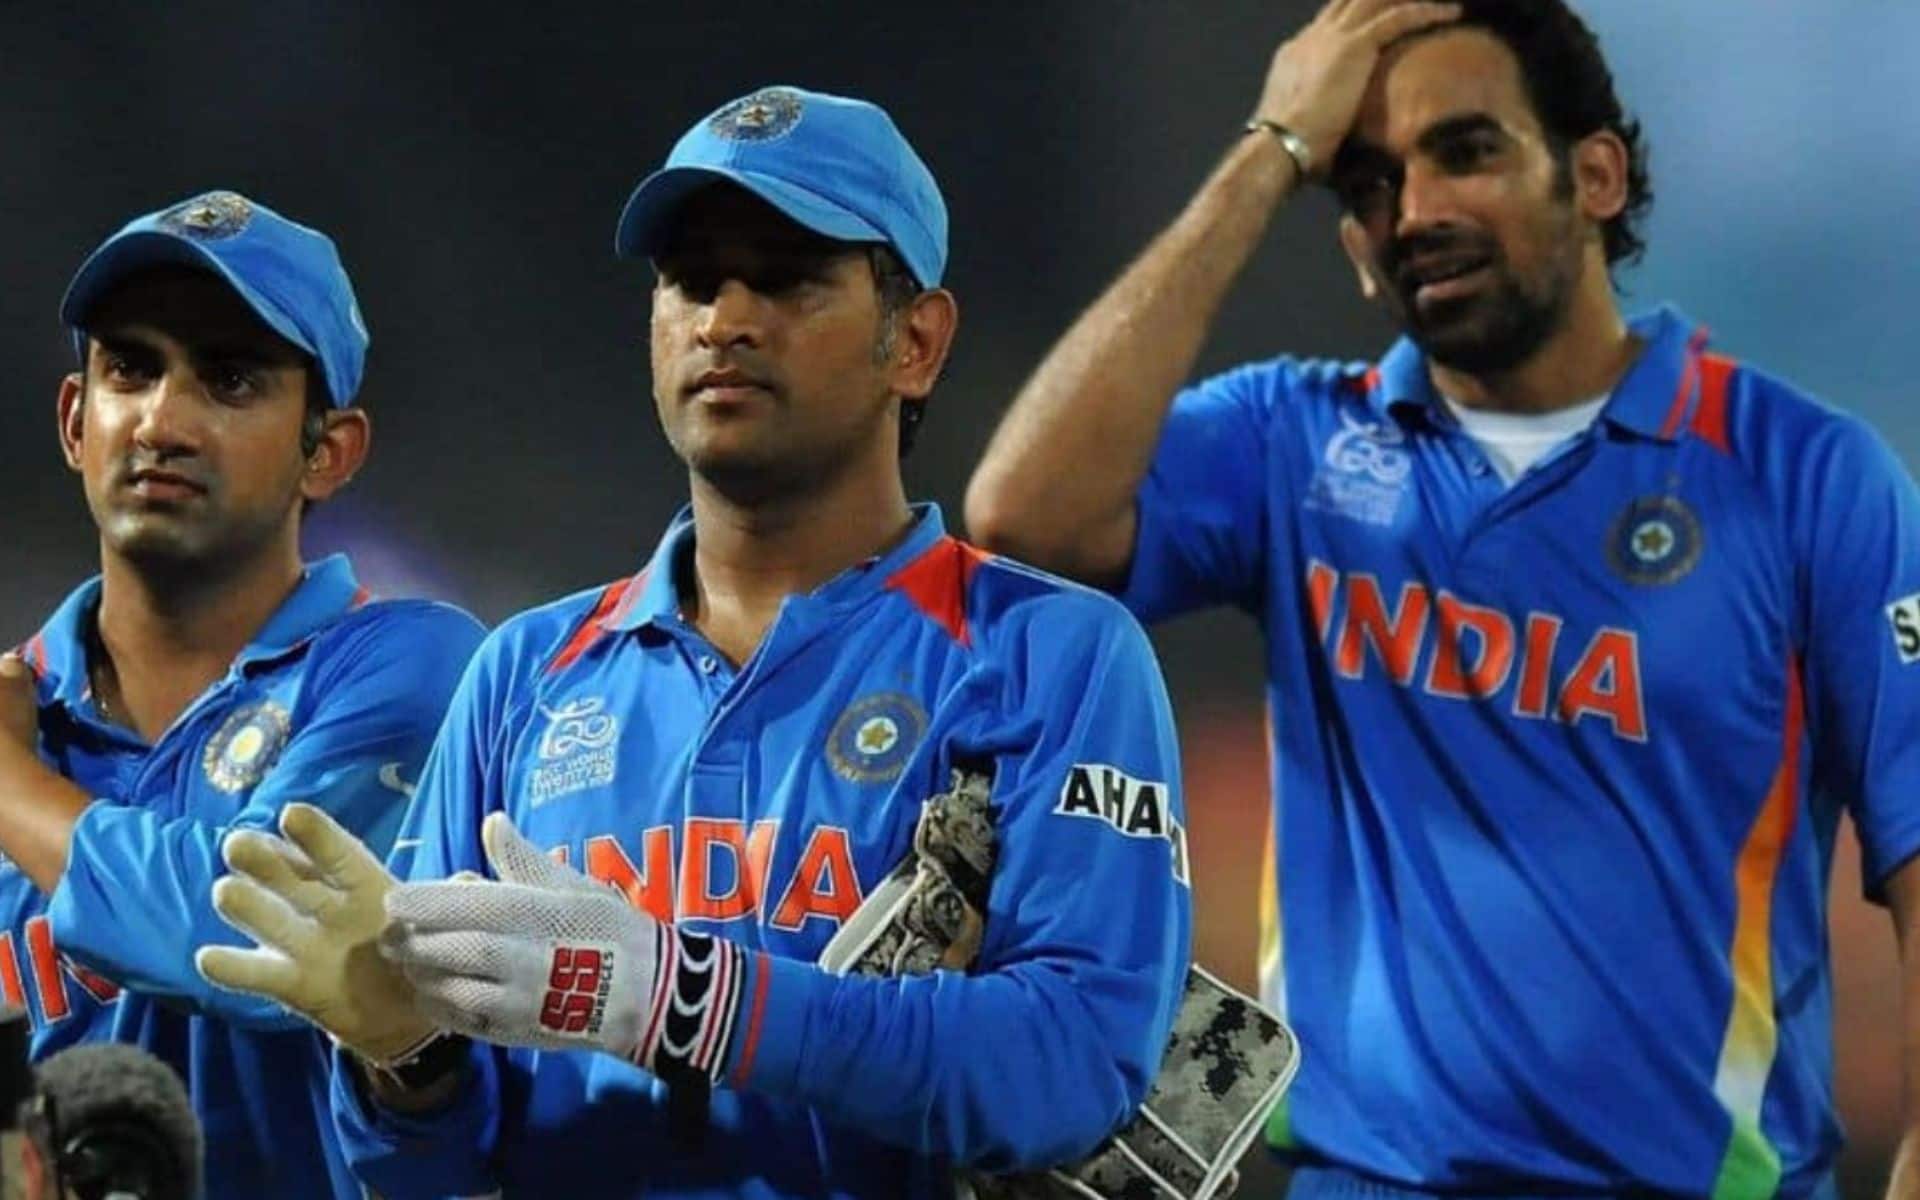 Indian jersey for T20 World Cup 2012 (Twitter)